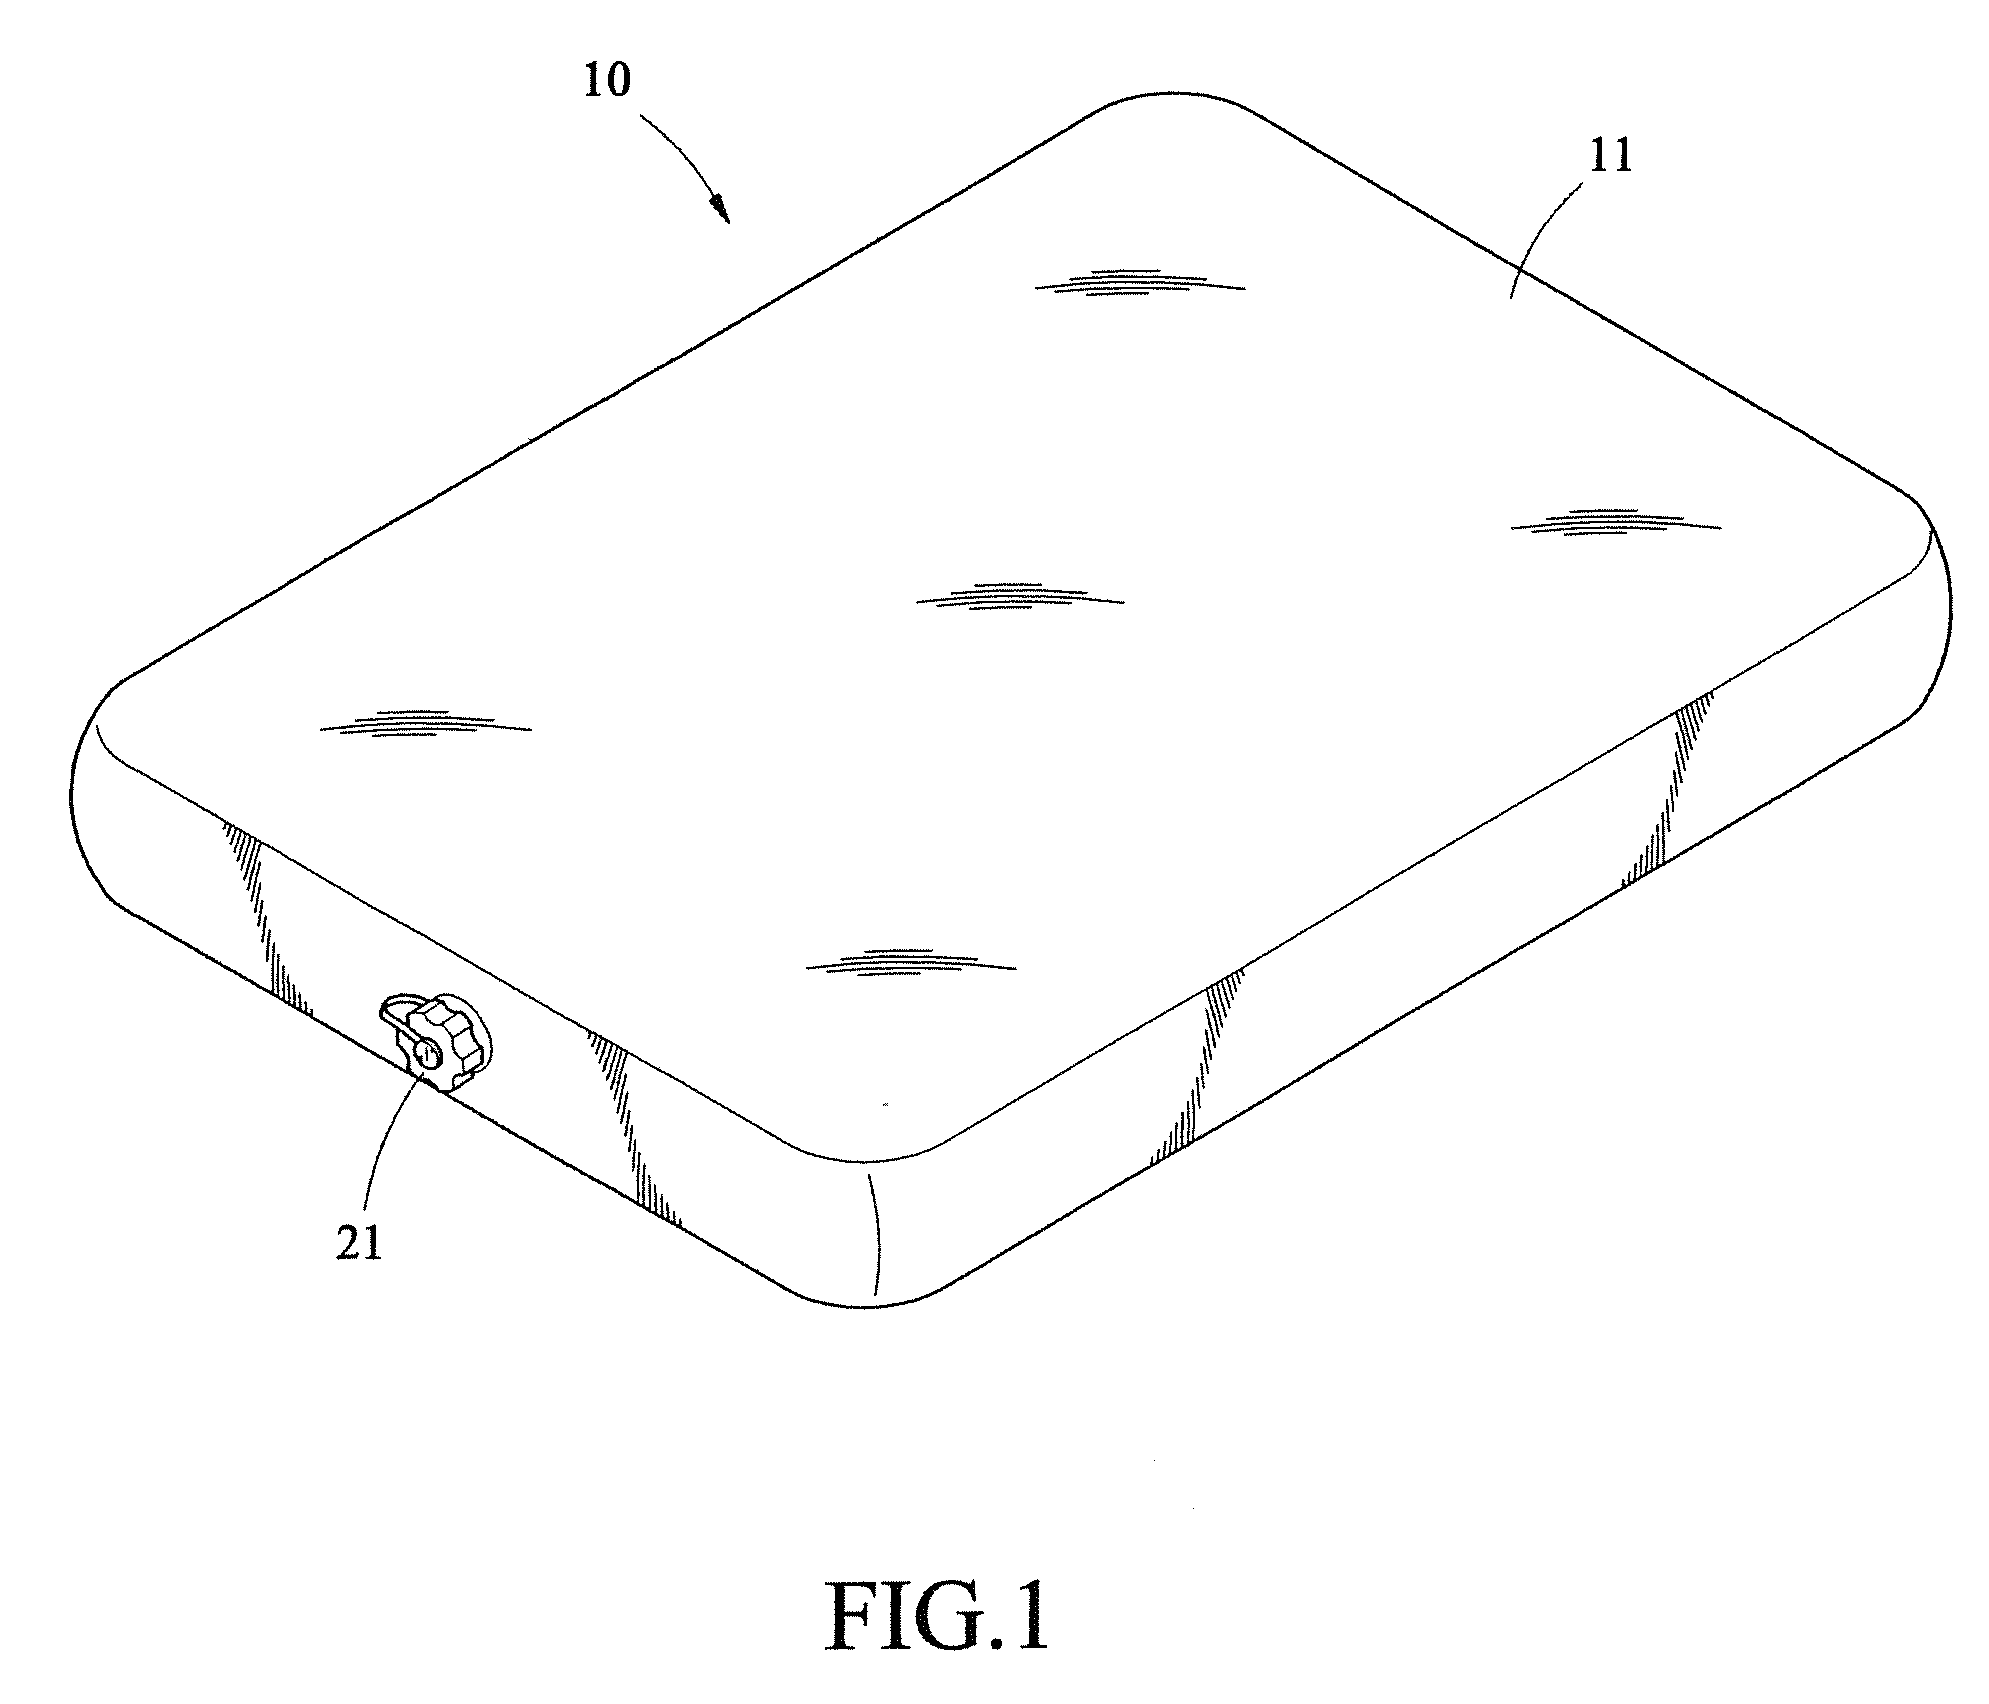 Layered structure of inflatable pad